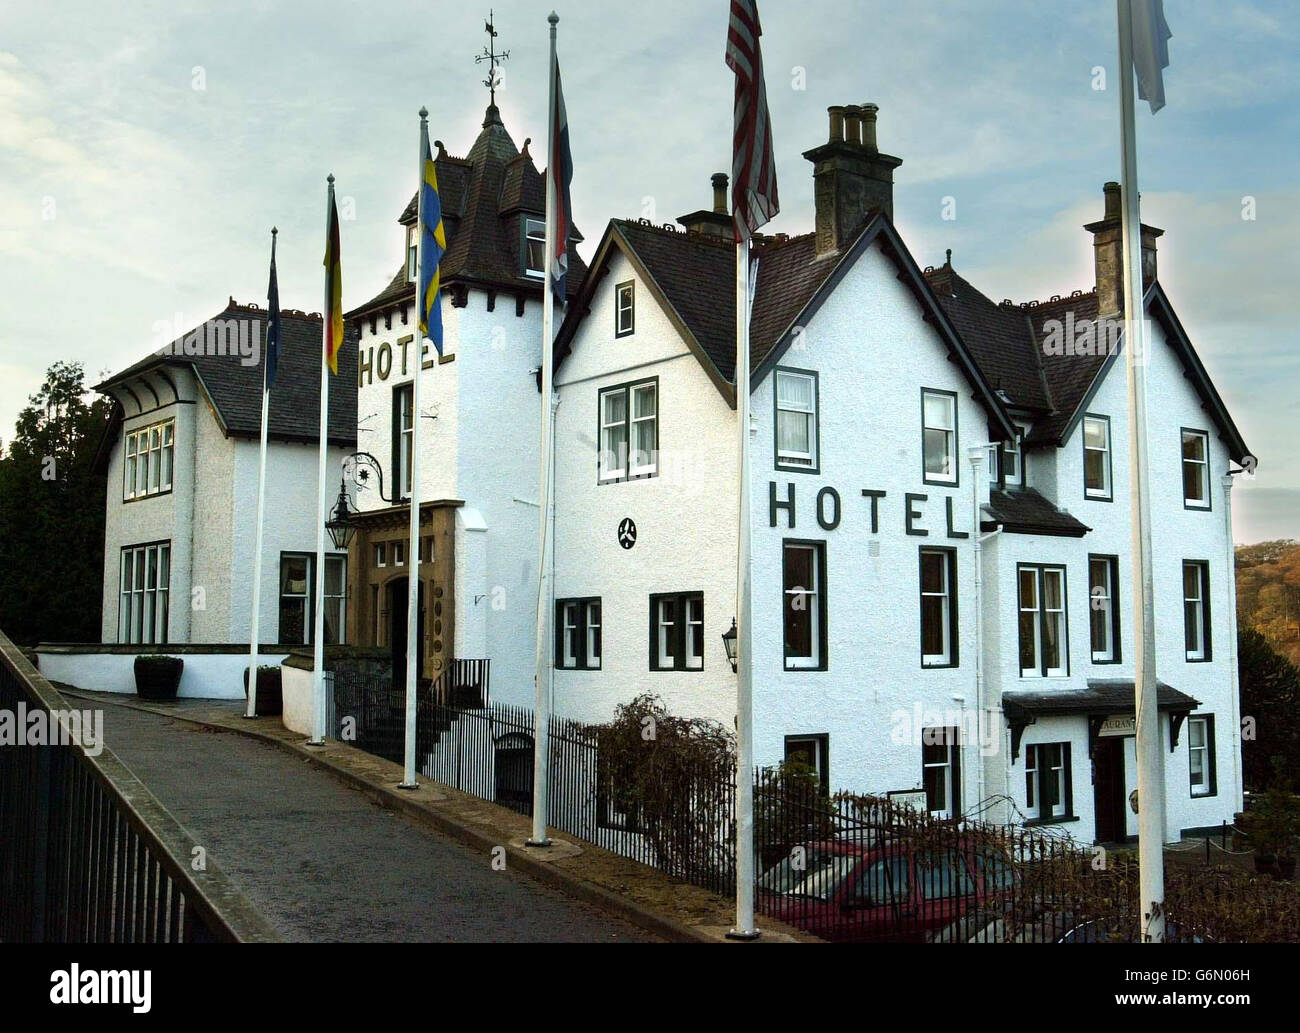 A general view of The Craigellachie Hotel in Moray, the location of ongoing peace talks between former Soviet countries. Parliamentarians from several former Soviet republics were locked in talks in Scotland today to try to resolve a decade-long regional conflict with delegations from Armenia, Azerbaijan and Georgia arriving in Moray in the Highlands last night for two days of negotiations. Stock Photo